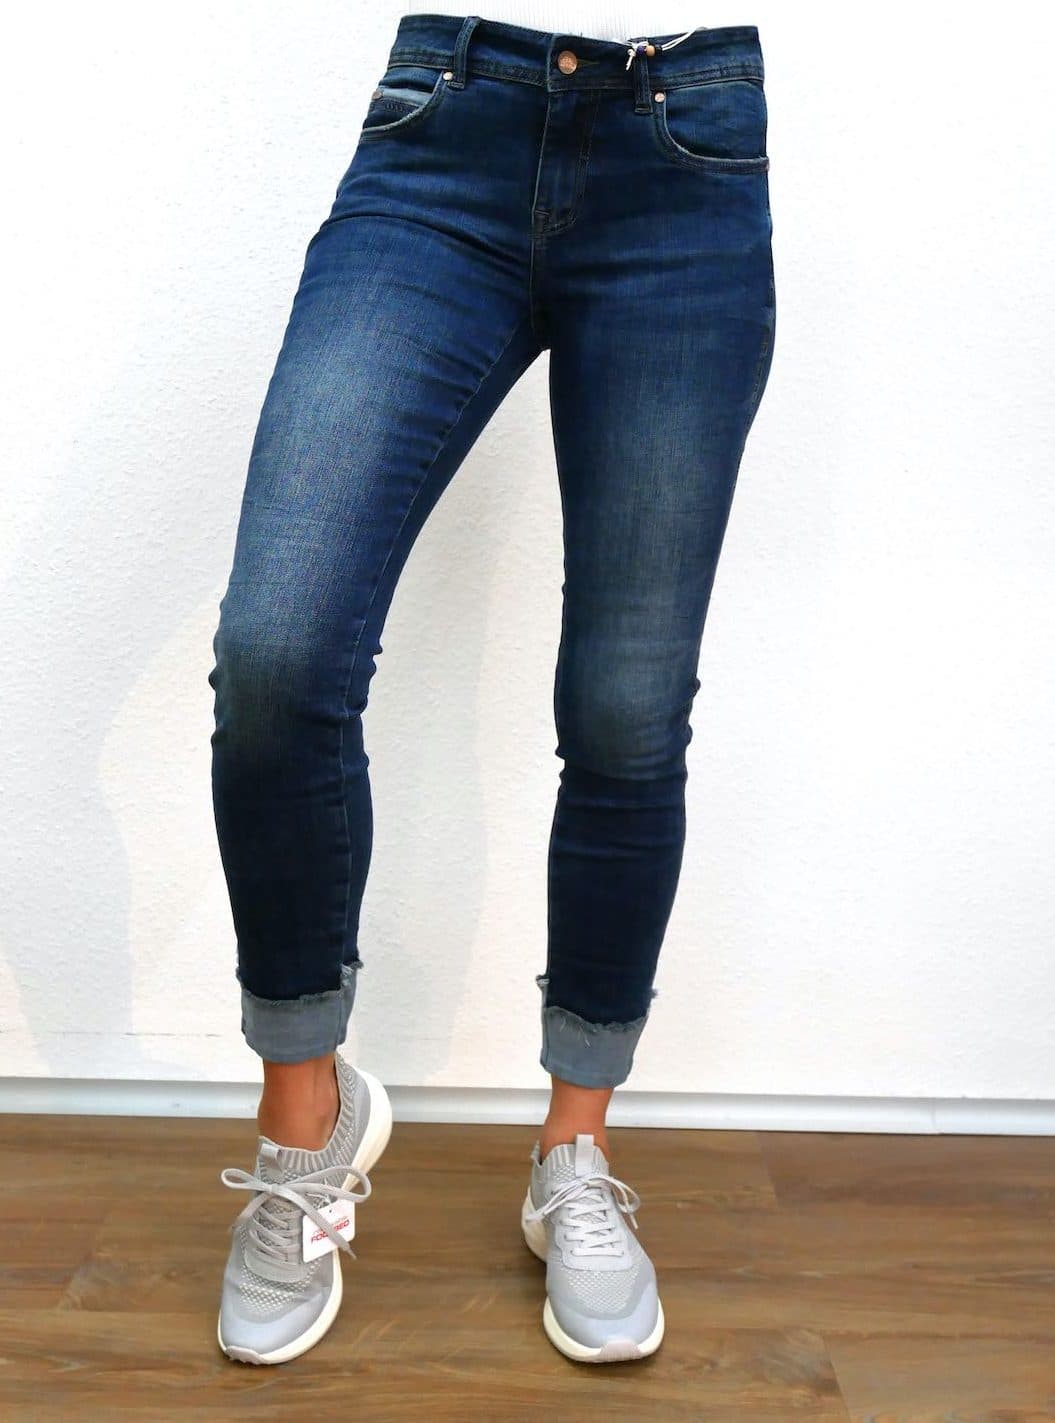 jeans red button